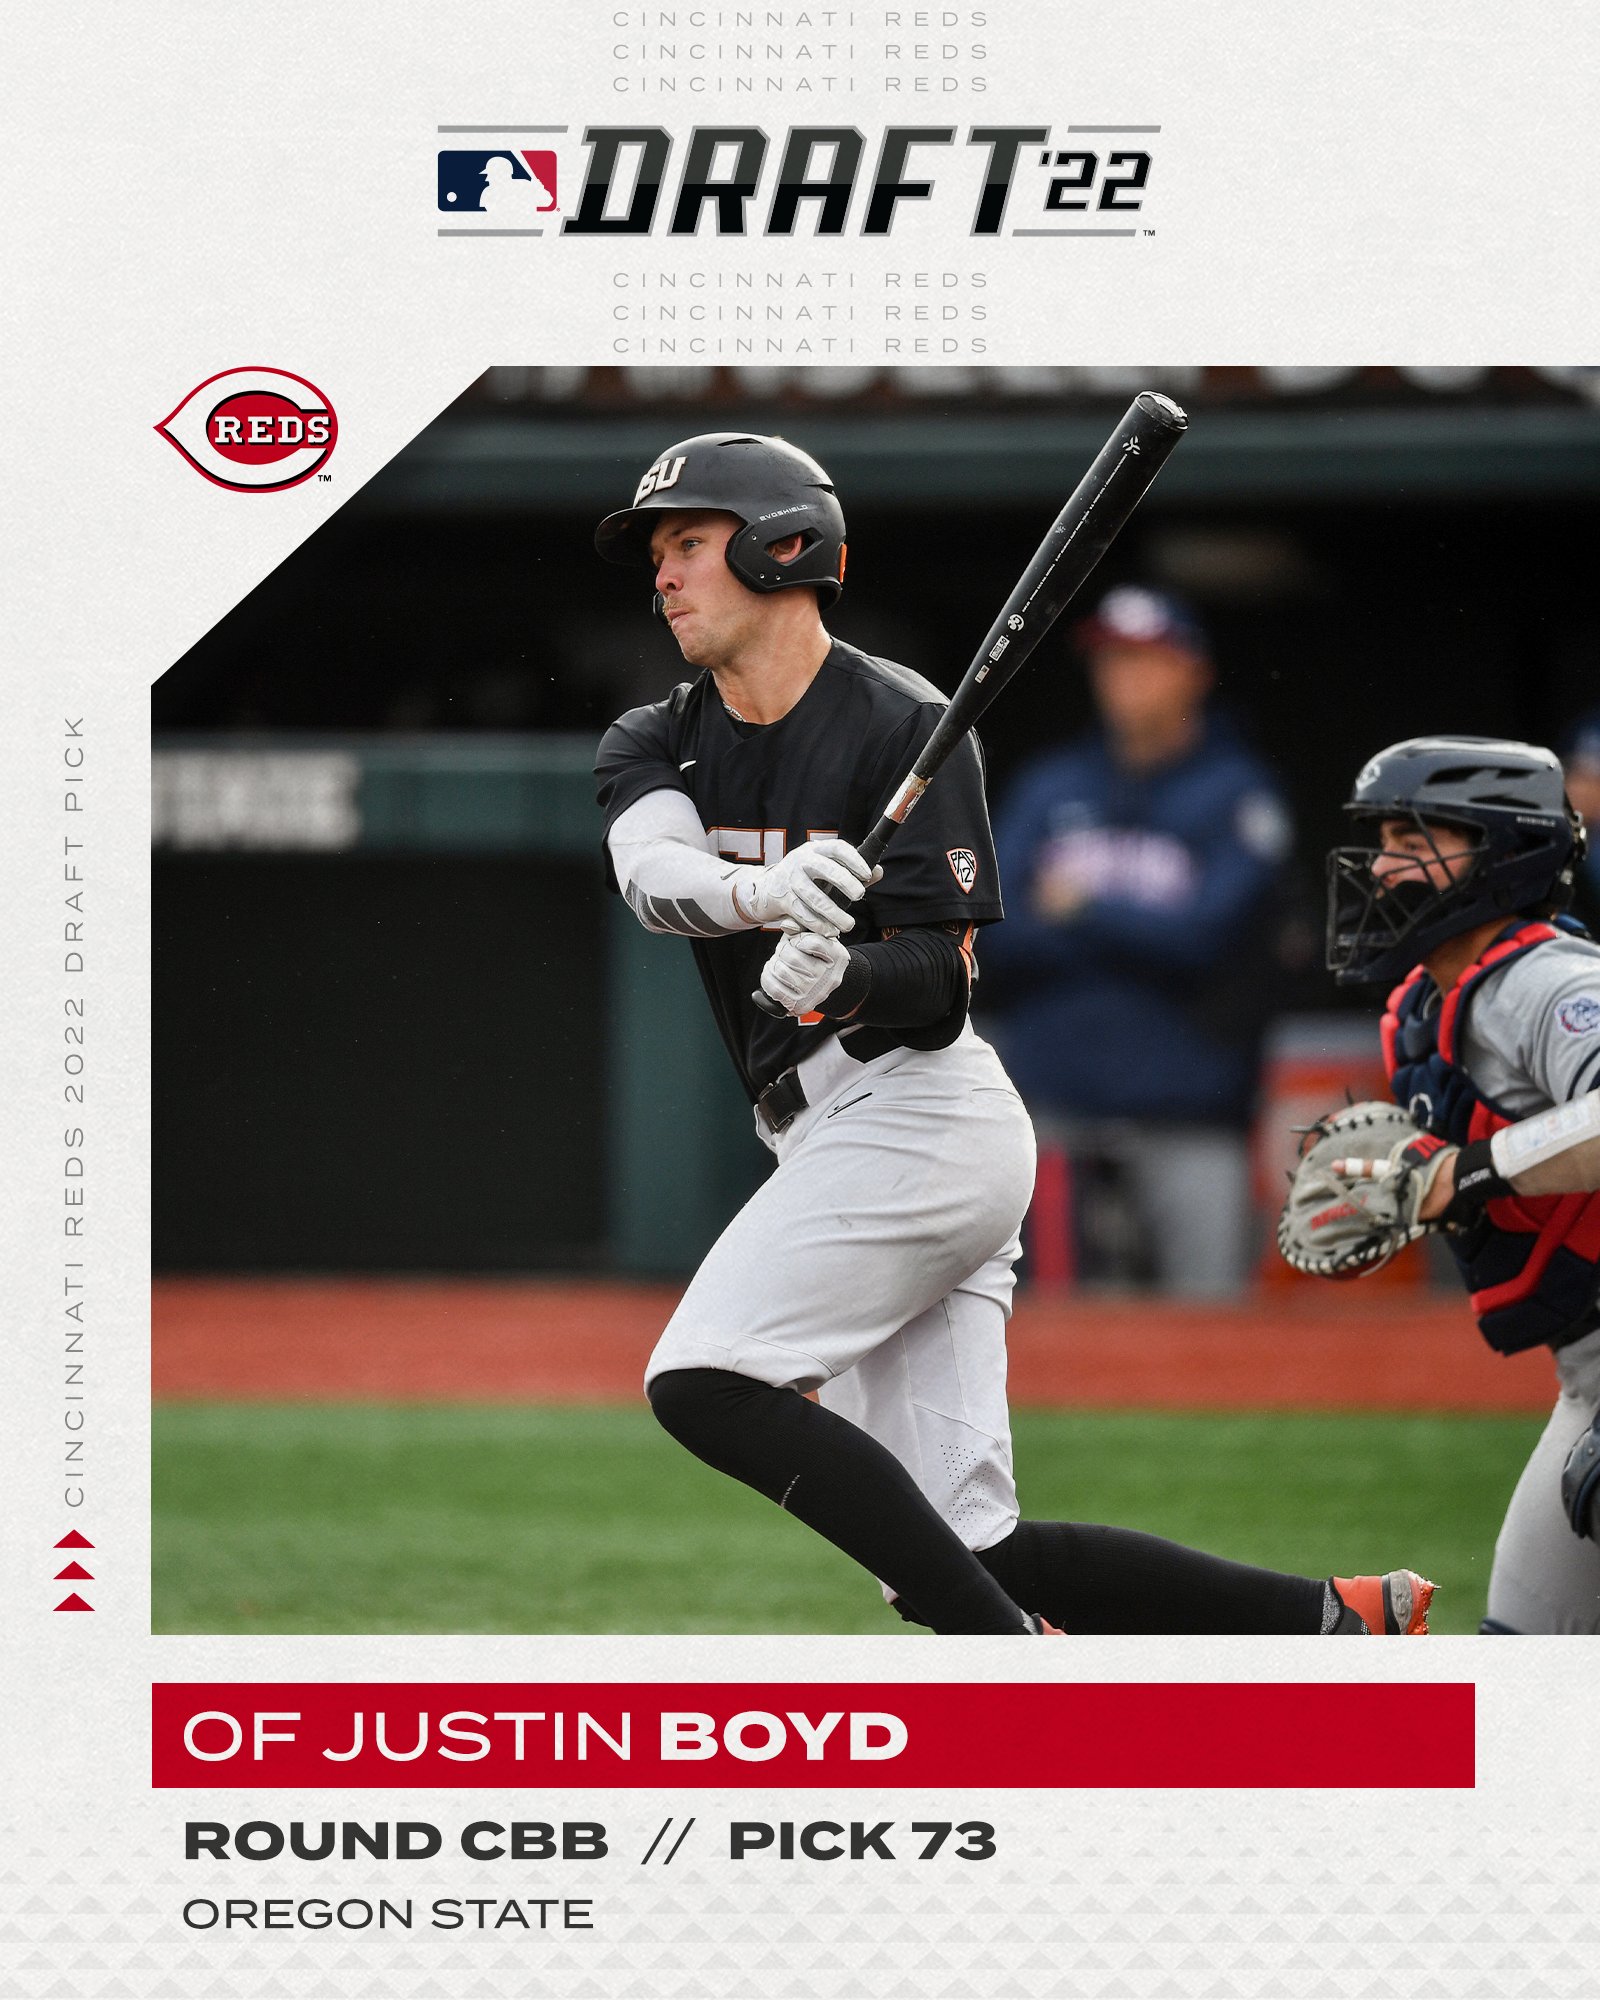 Cincinnati Reds on Twitter "With the 73rd pick in the 2022 MLBDraft